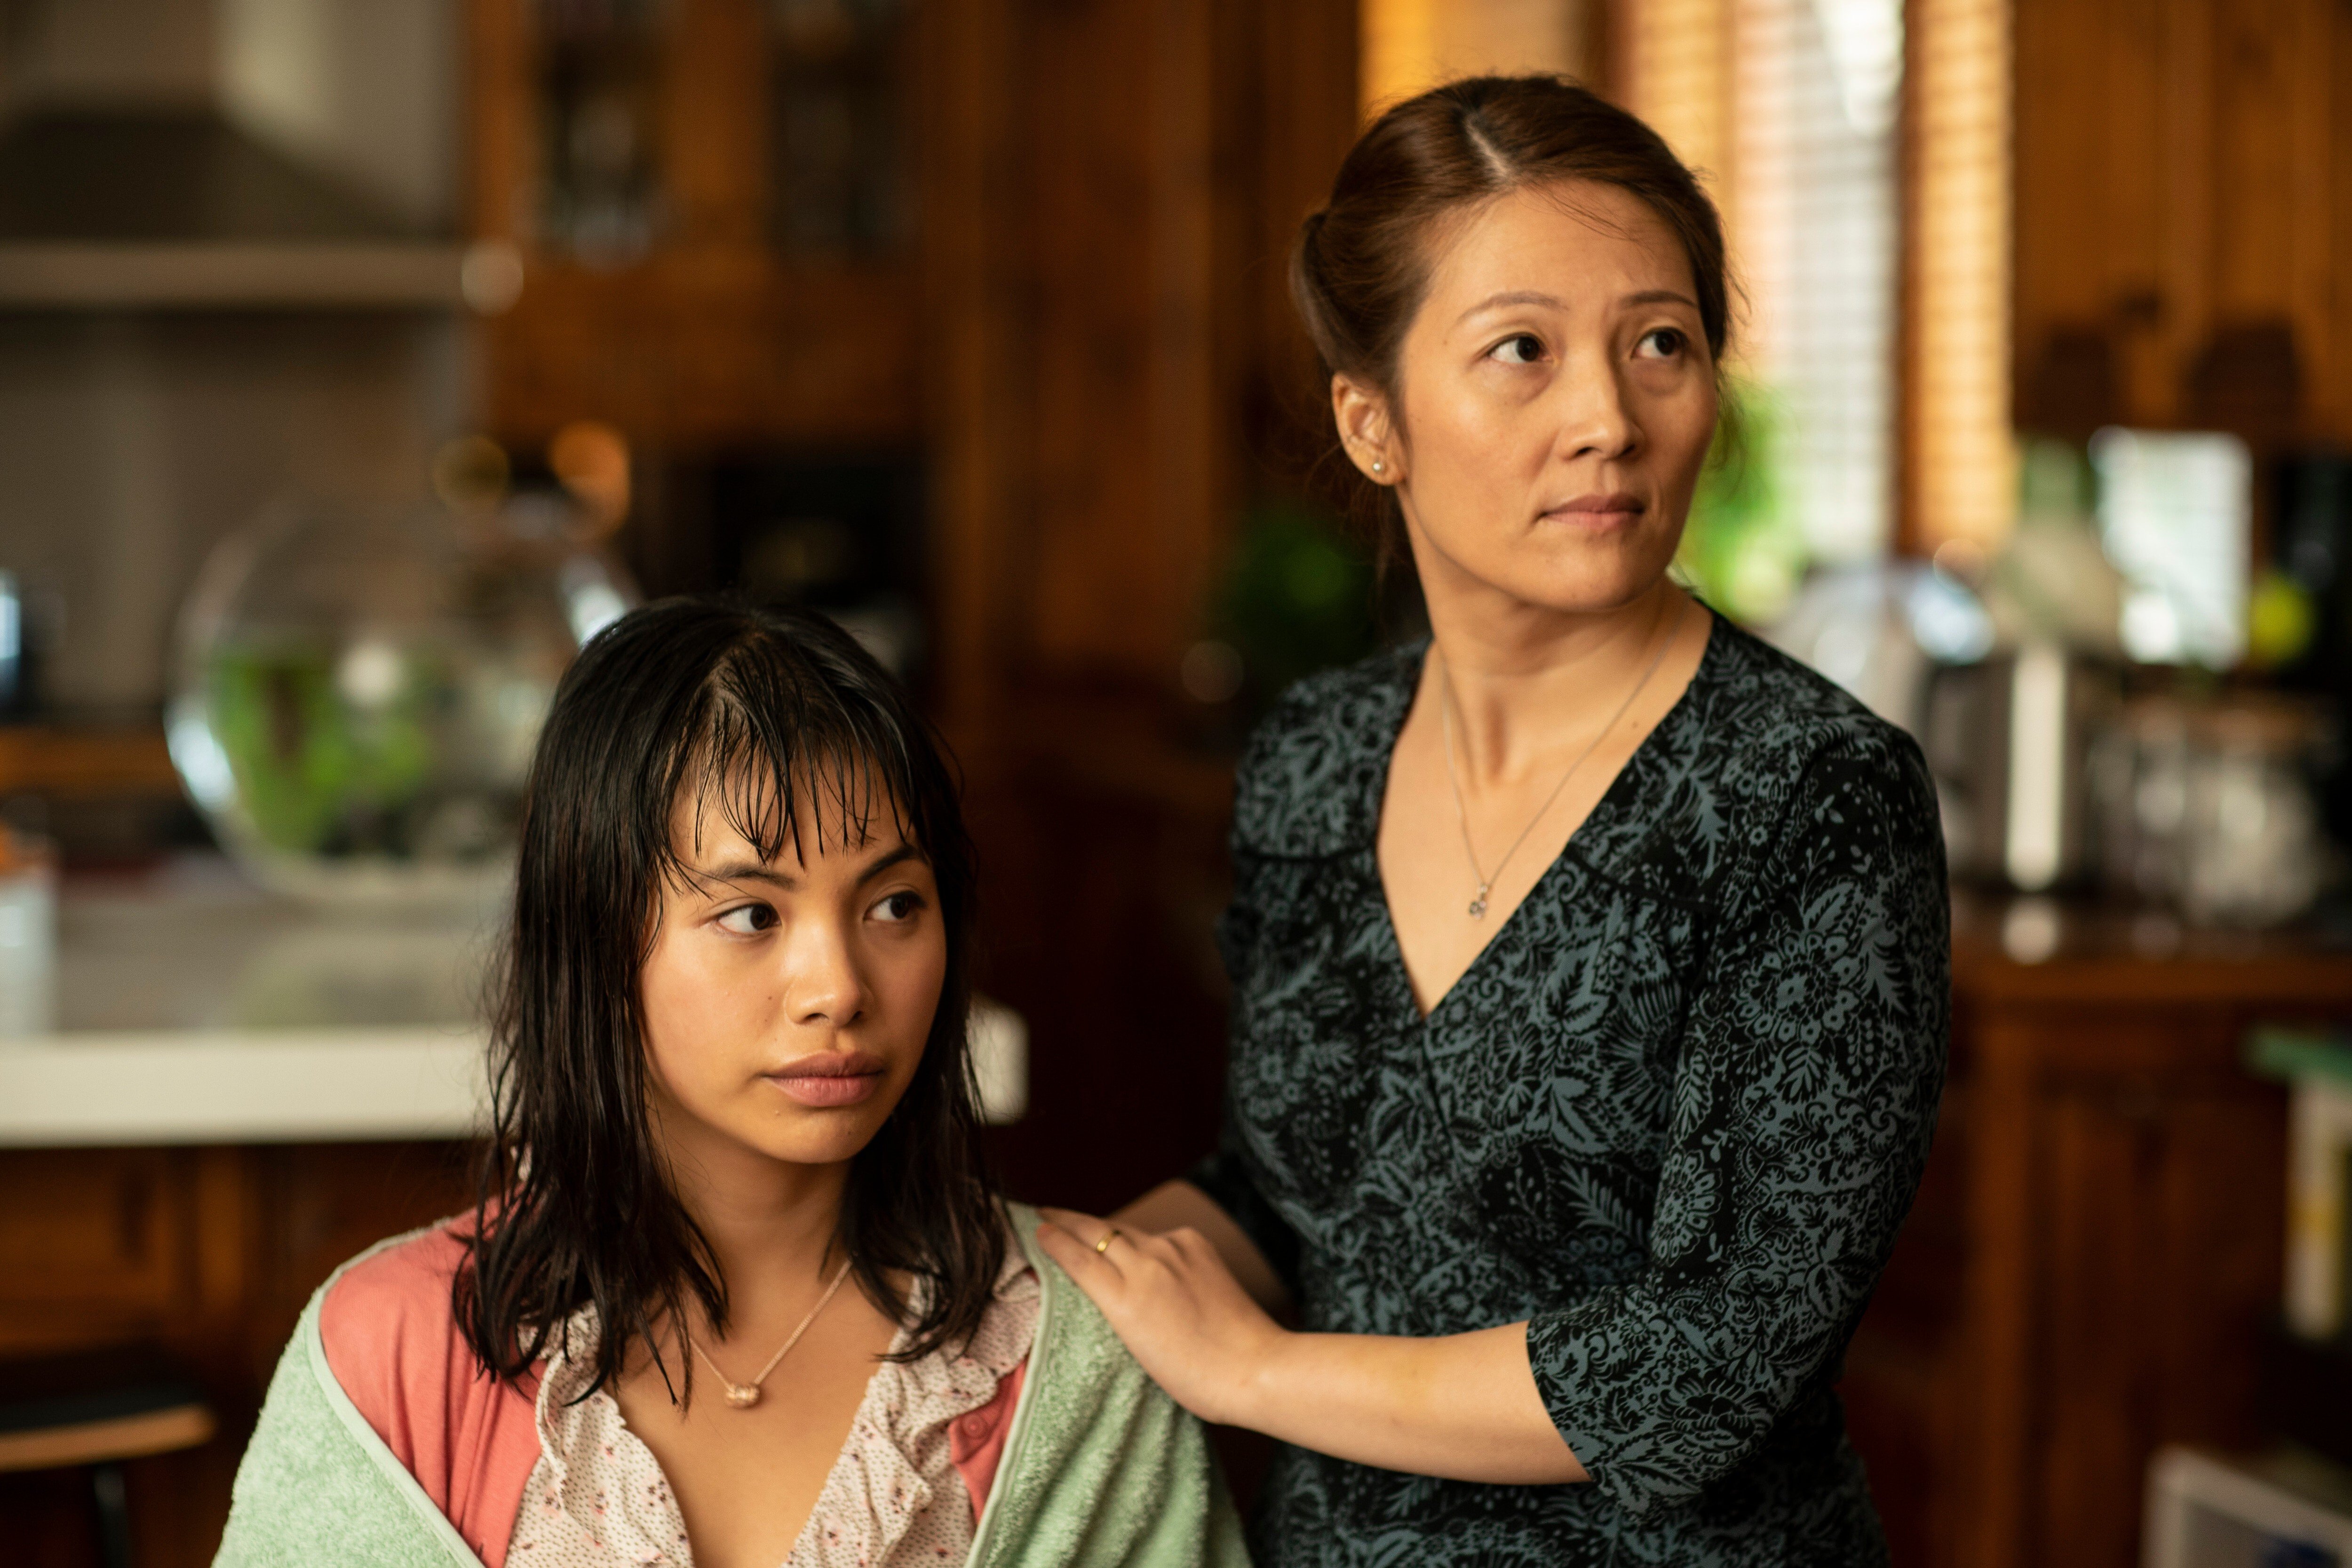 Jillian Nguyen (left) as Sophie Tran and Oakley Kwon as Diane Tran in Hungry Ghosts, a new Australian television series that marks a milestone for Asian-Australian representation.